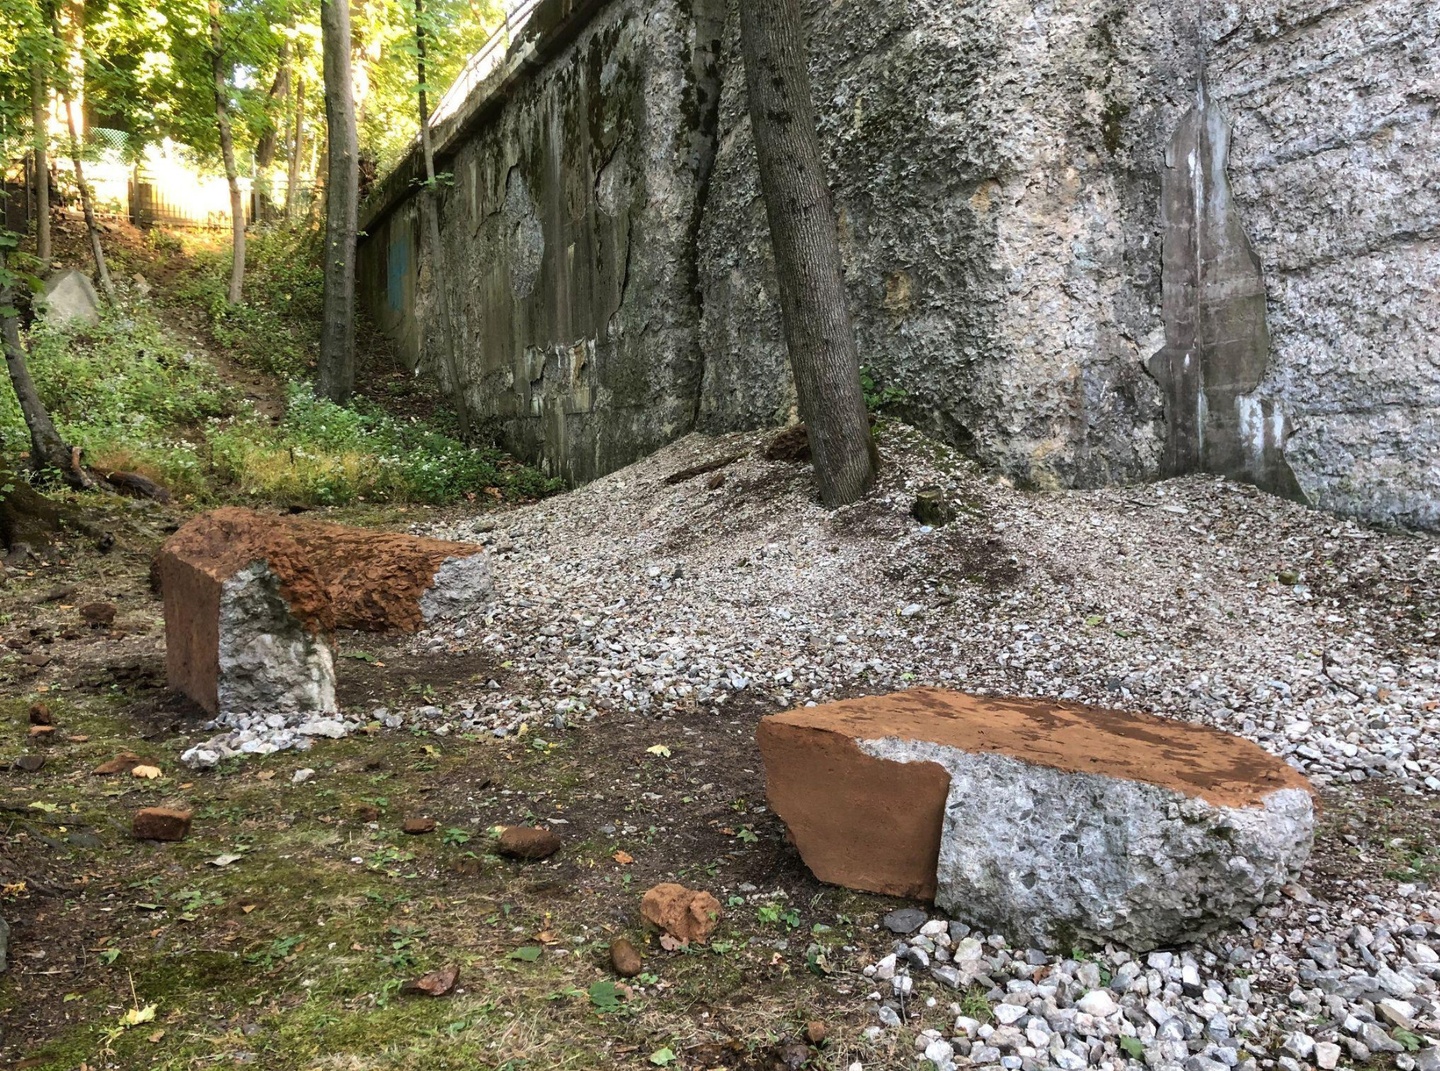 Sculptural installations of concrete and architectural fragments, set outdoors between a wooded area and an old wall.